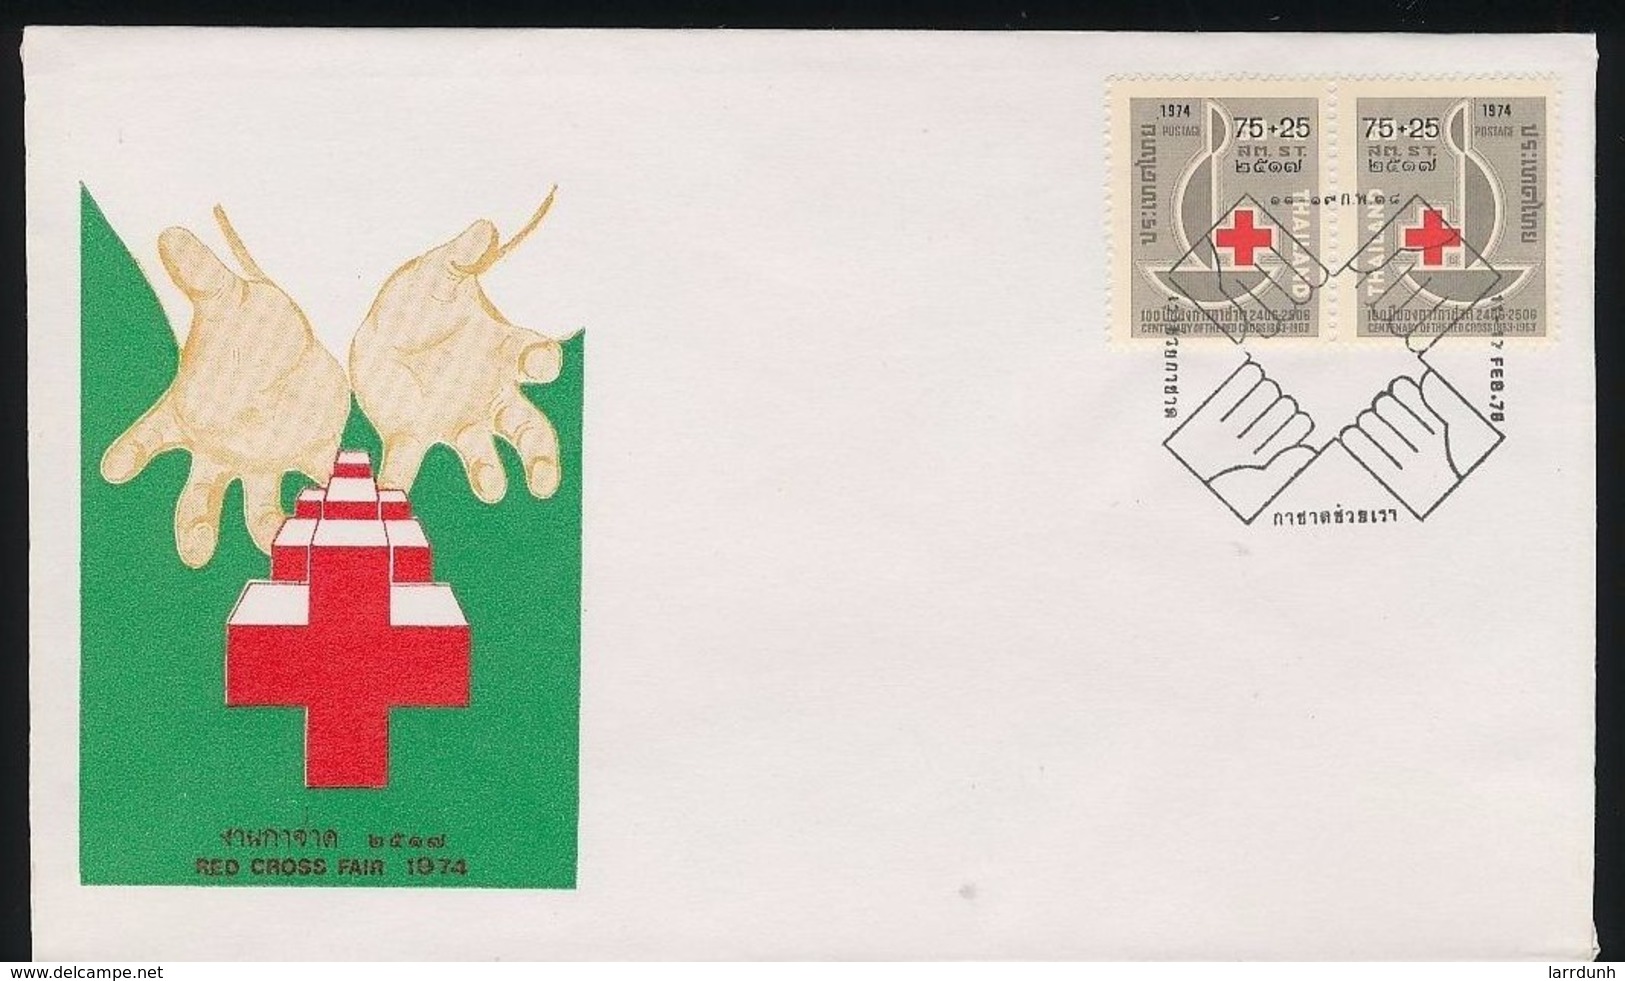 Thailand Red Cross Pair Day Of Issue Cover 1974 A04s - Thailand